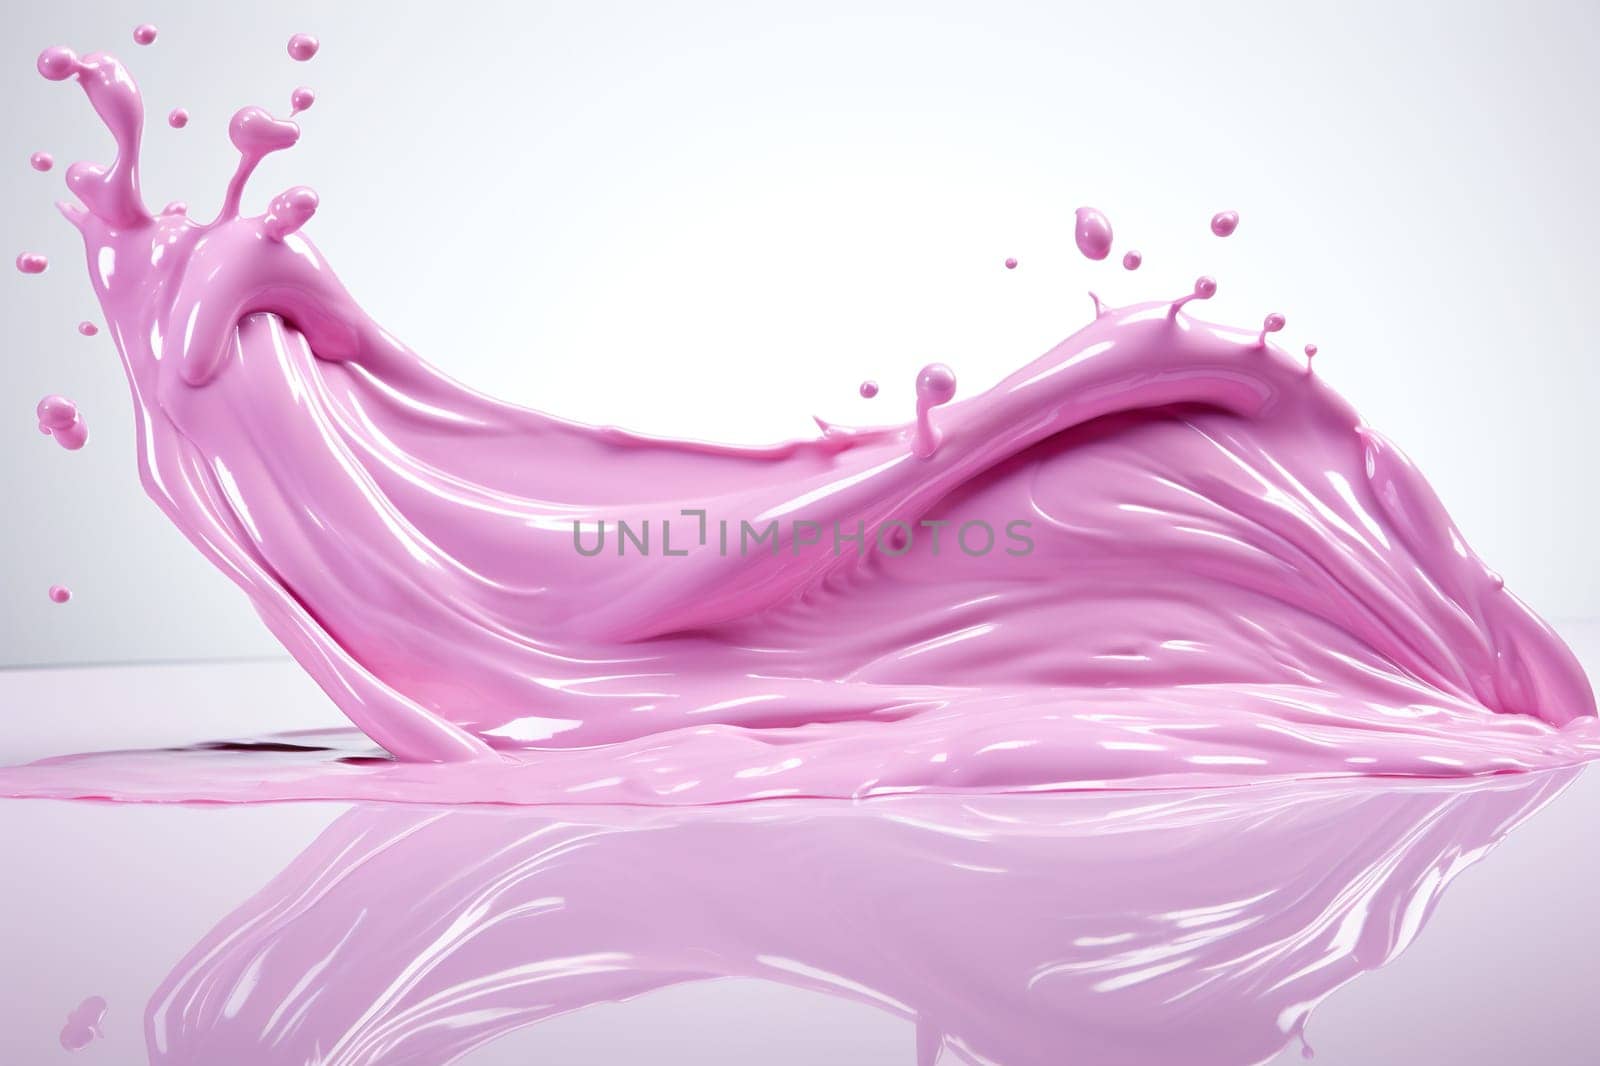 Splash of lilac icing, milk on a white background with reflection. Studio photo of the product. Generated by artificial intelligence by Vovmar